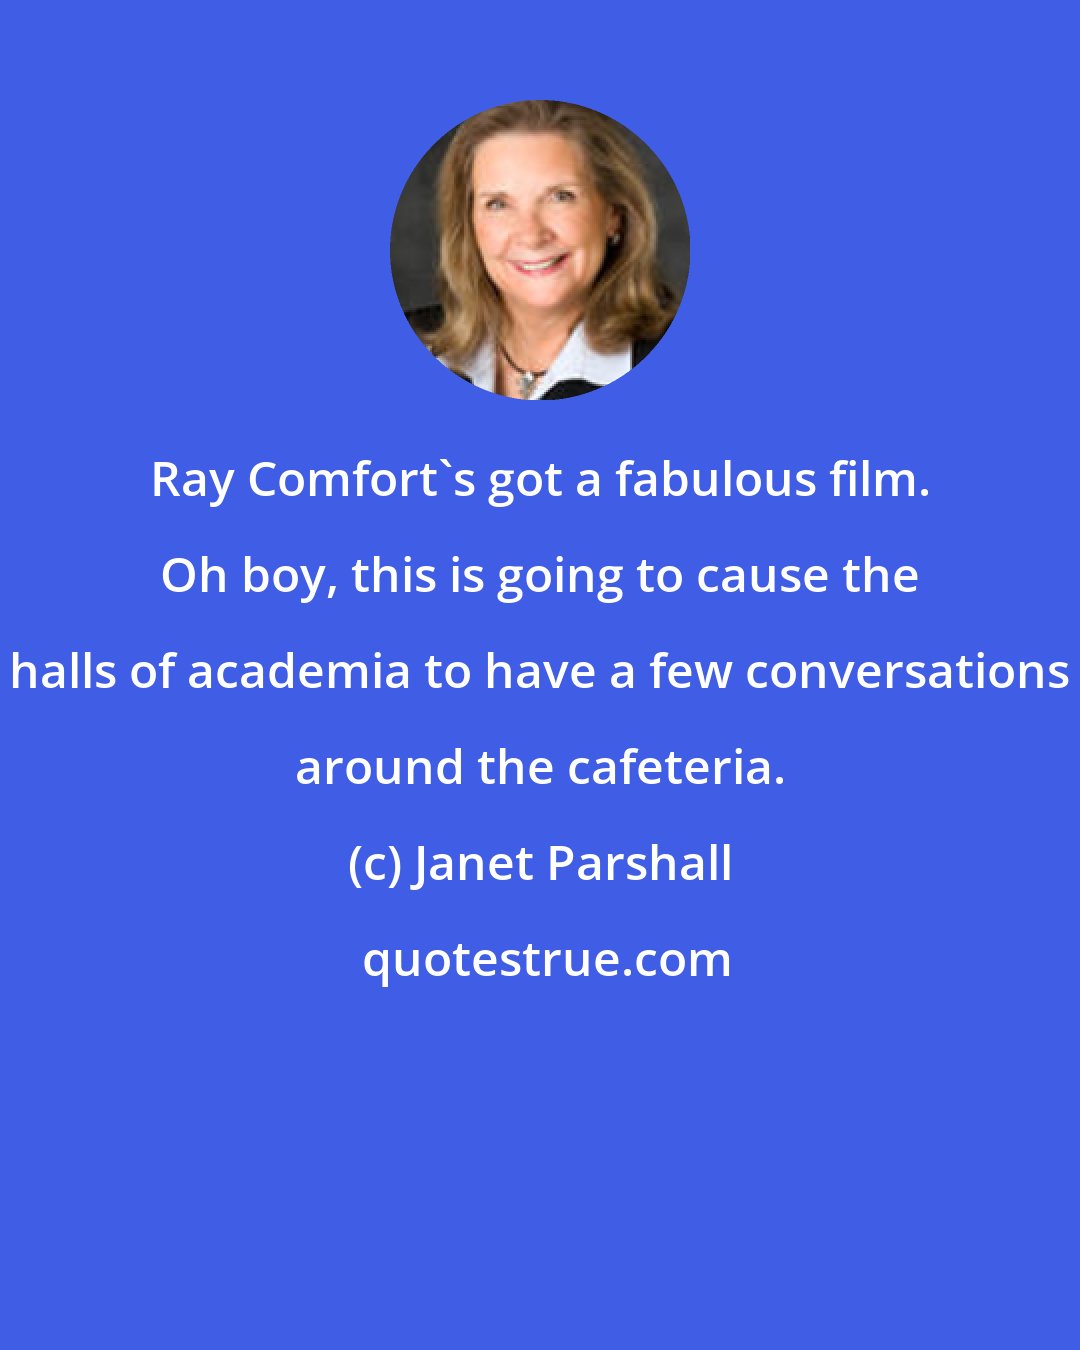 Janet Parshall: Ray Comfort's got a fabulous film. Oh boy, this is going to cause the halls of academia to have a few conversations around the cafeteria.